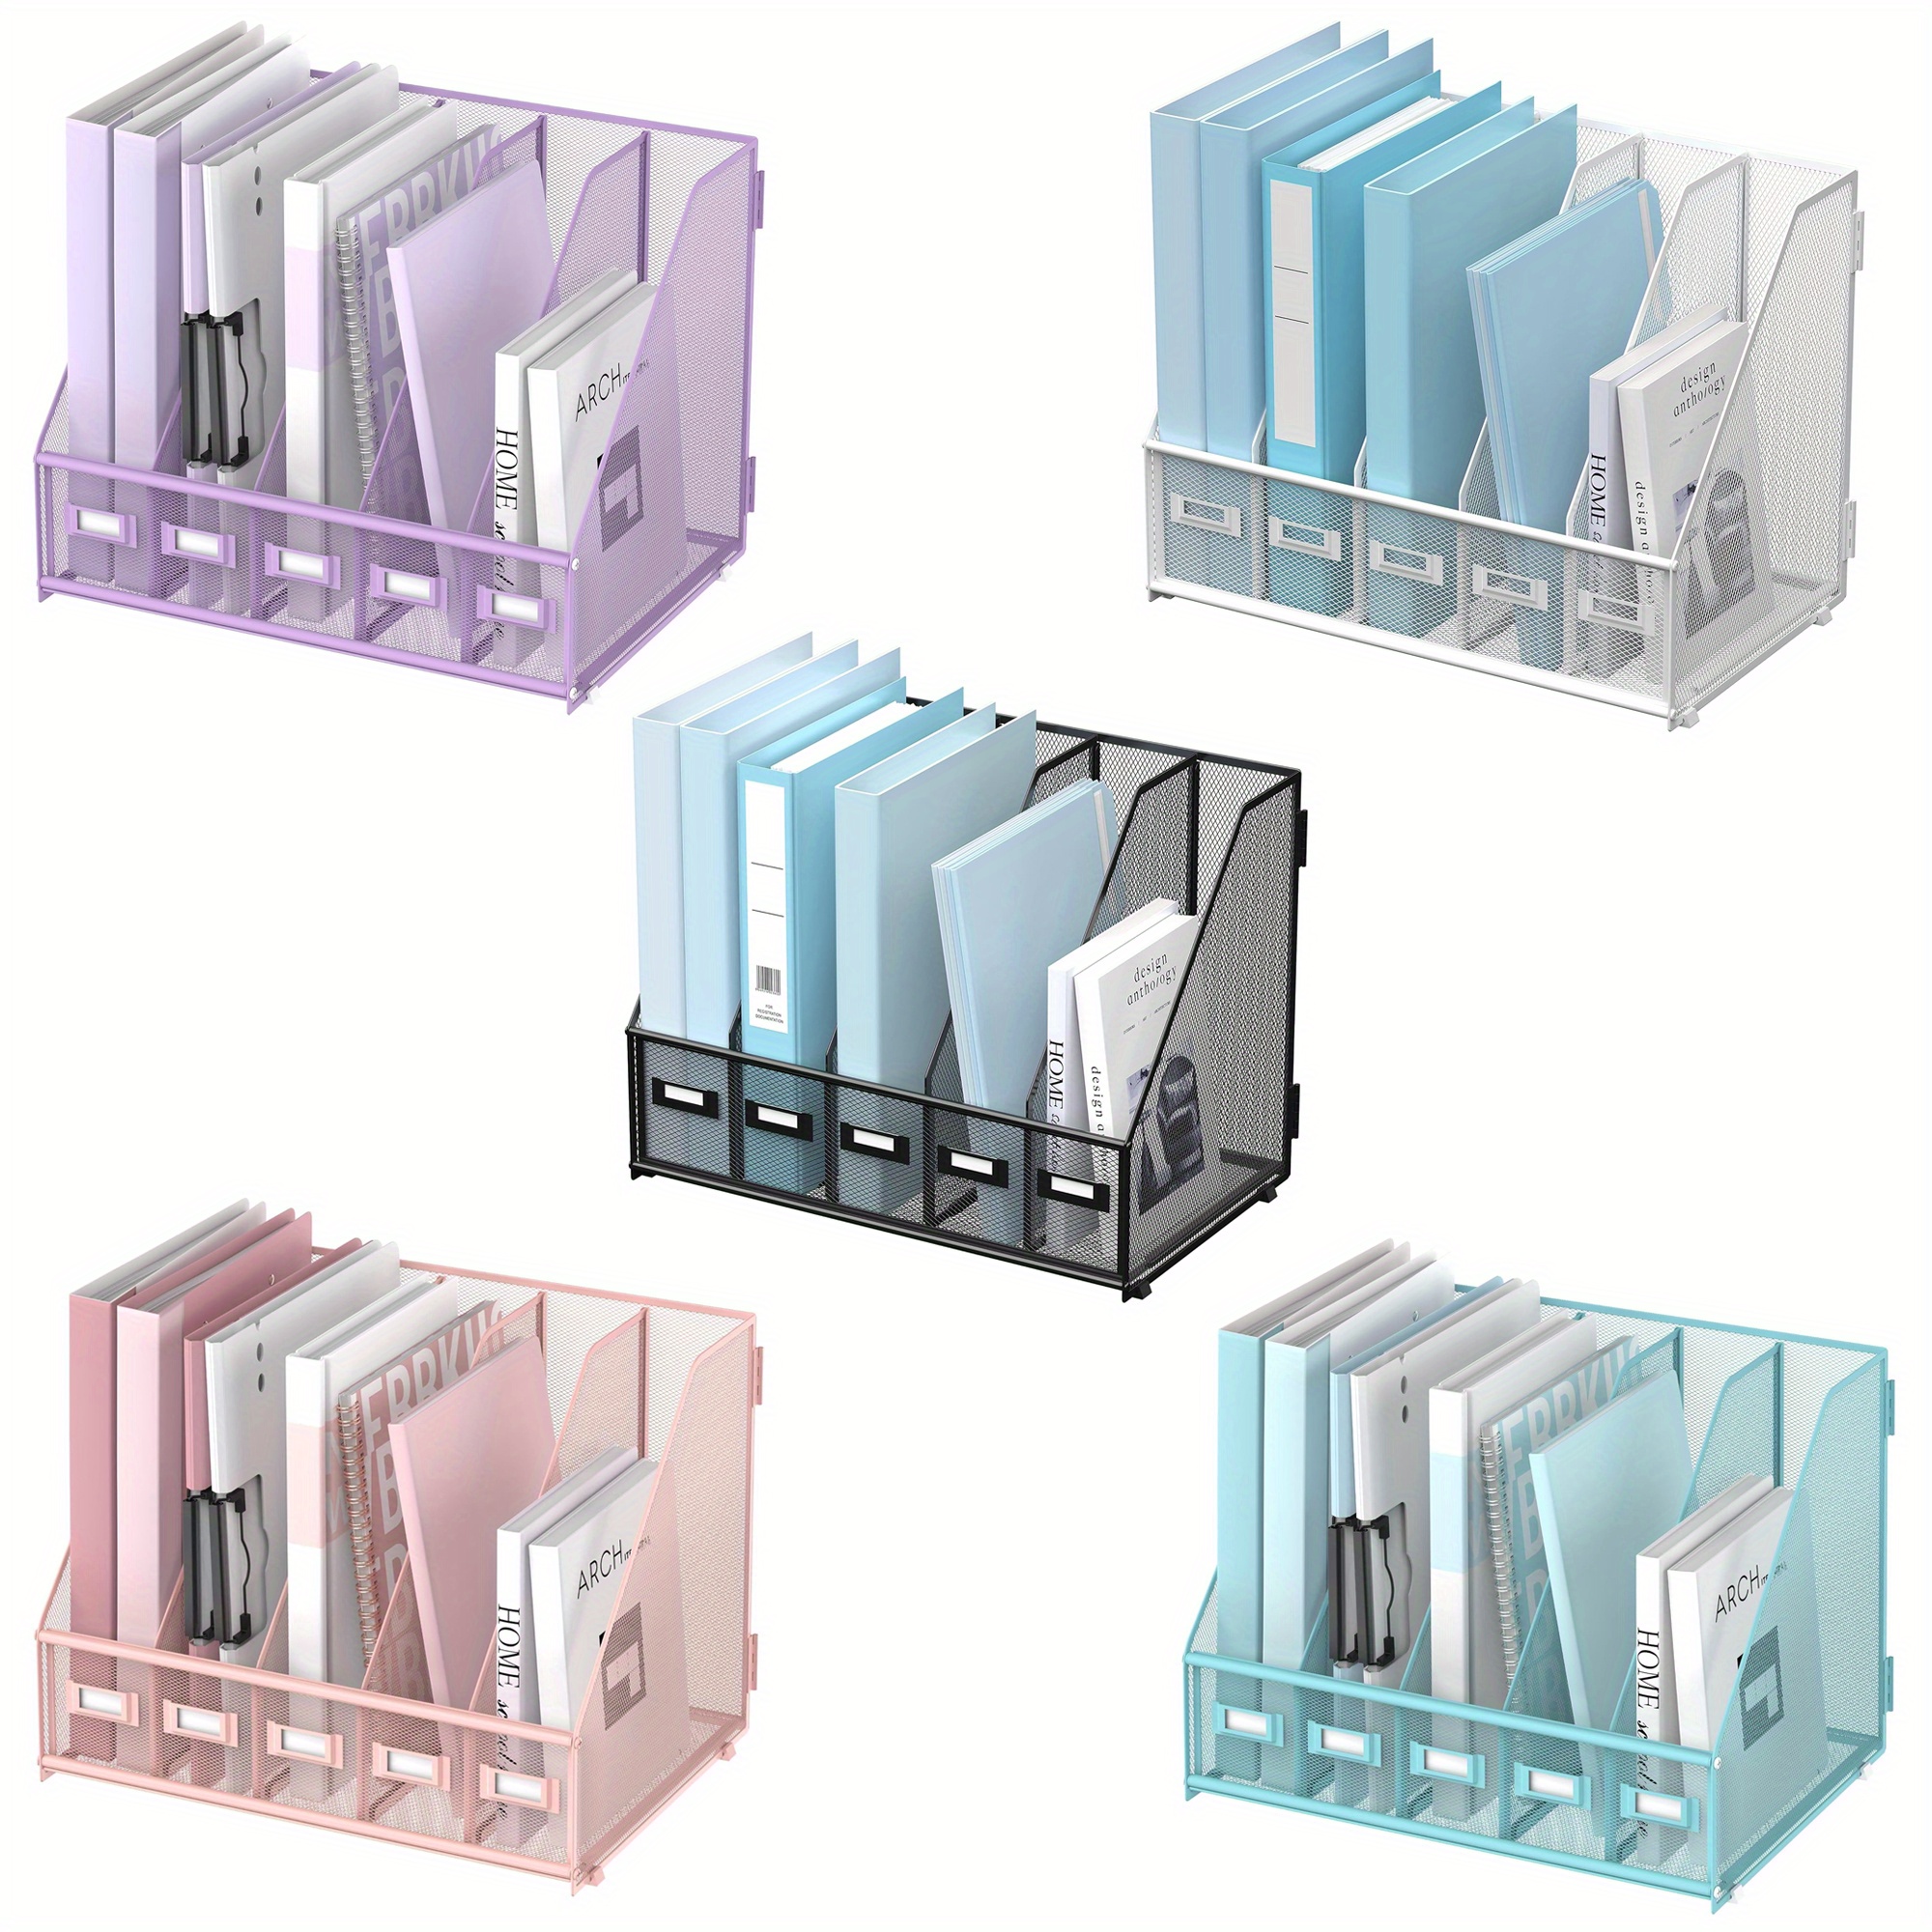 

Jmhud A Desk And File Rack With 5 Vertical Compartments, Magazine And Document Storage Organizer, Which Can Be Placed On The Office Desktop And Home Workspace